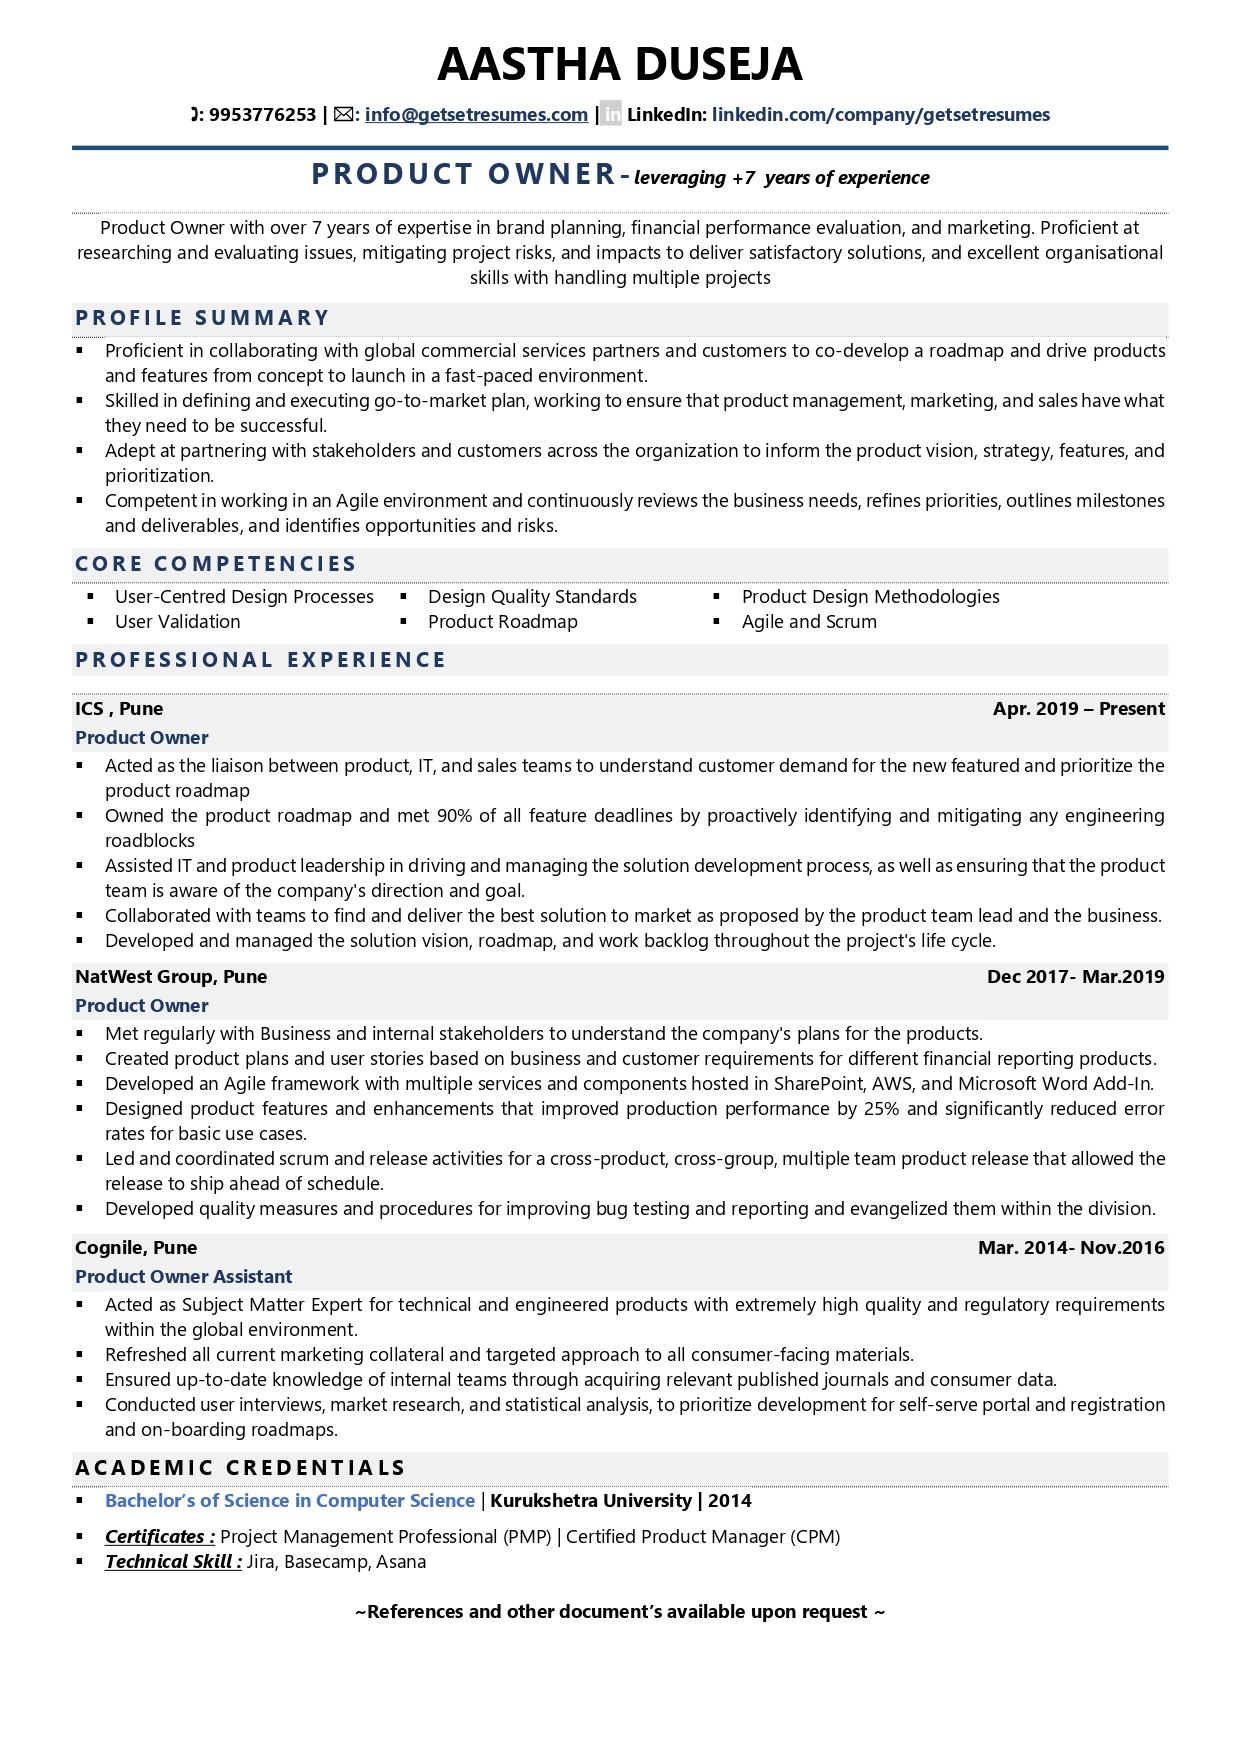 Product Owner Resume Examples & Template (with job winning tips)